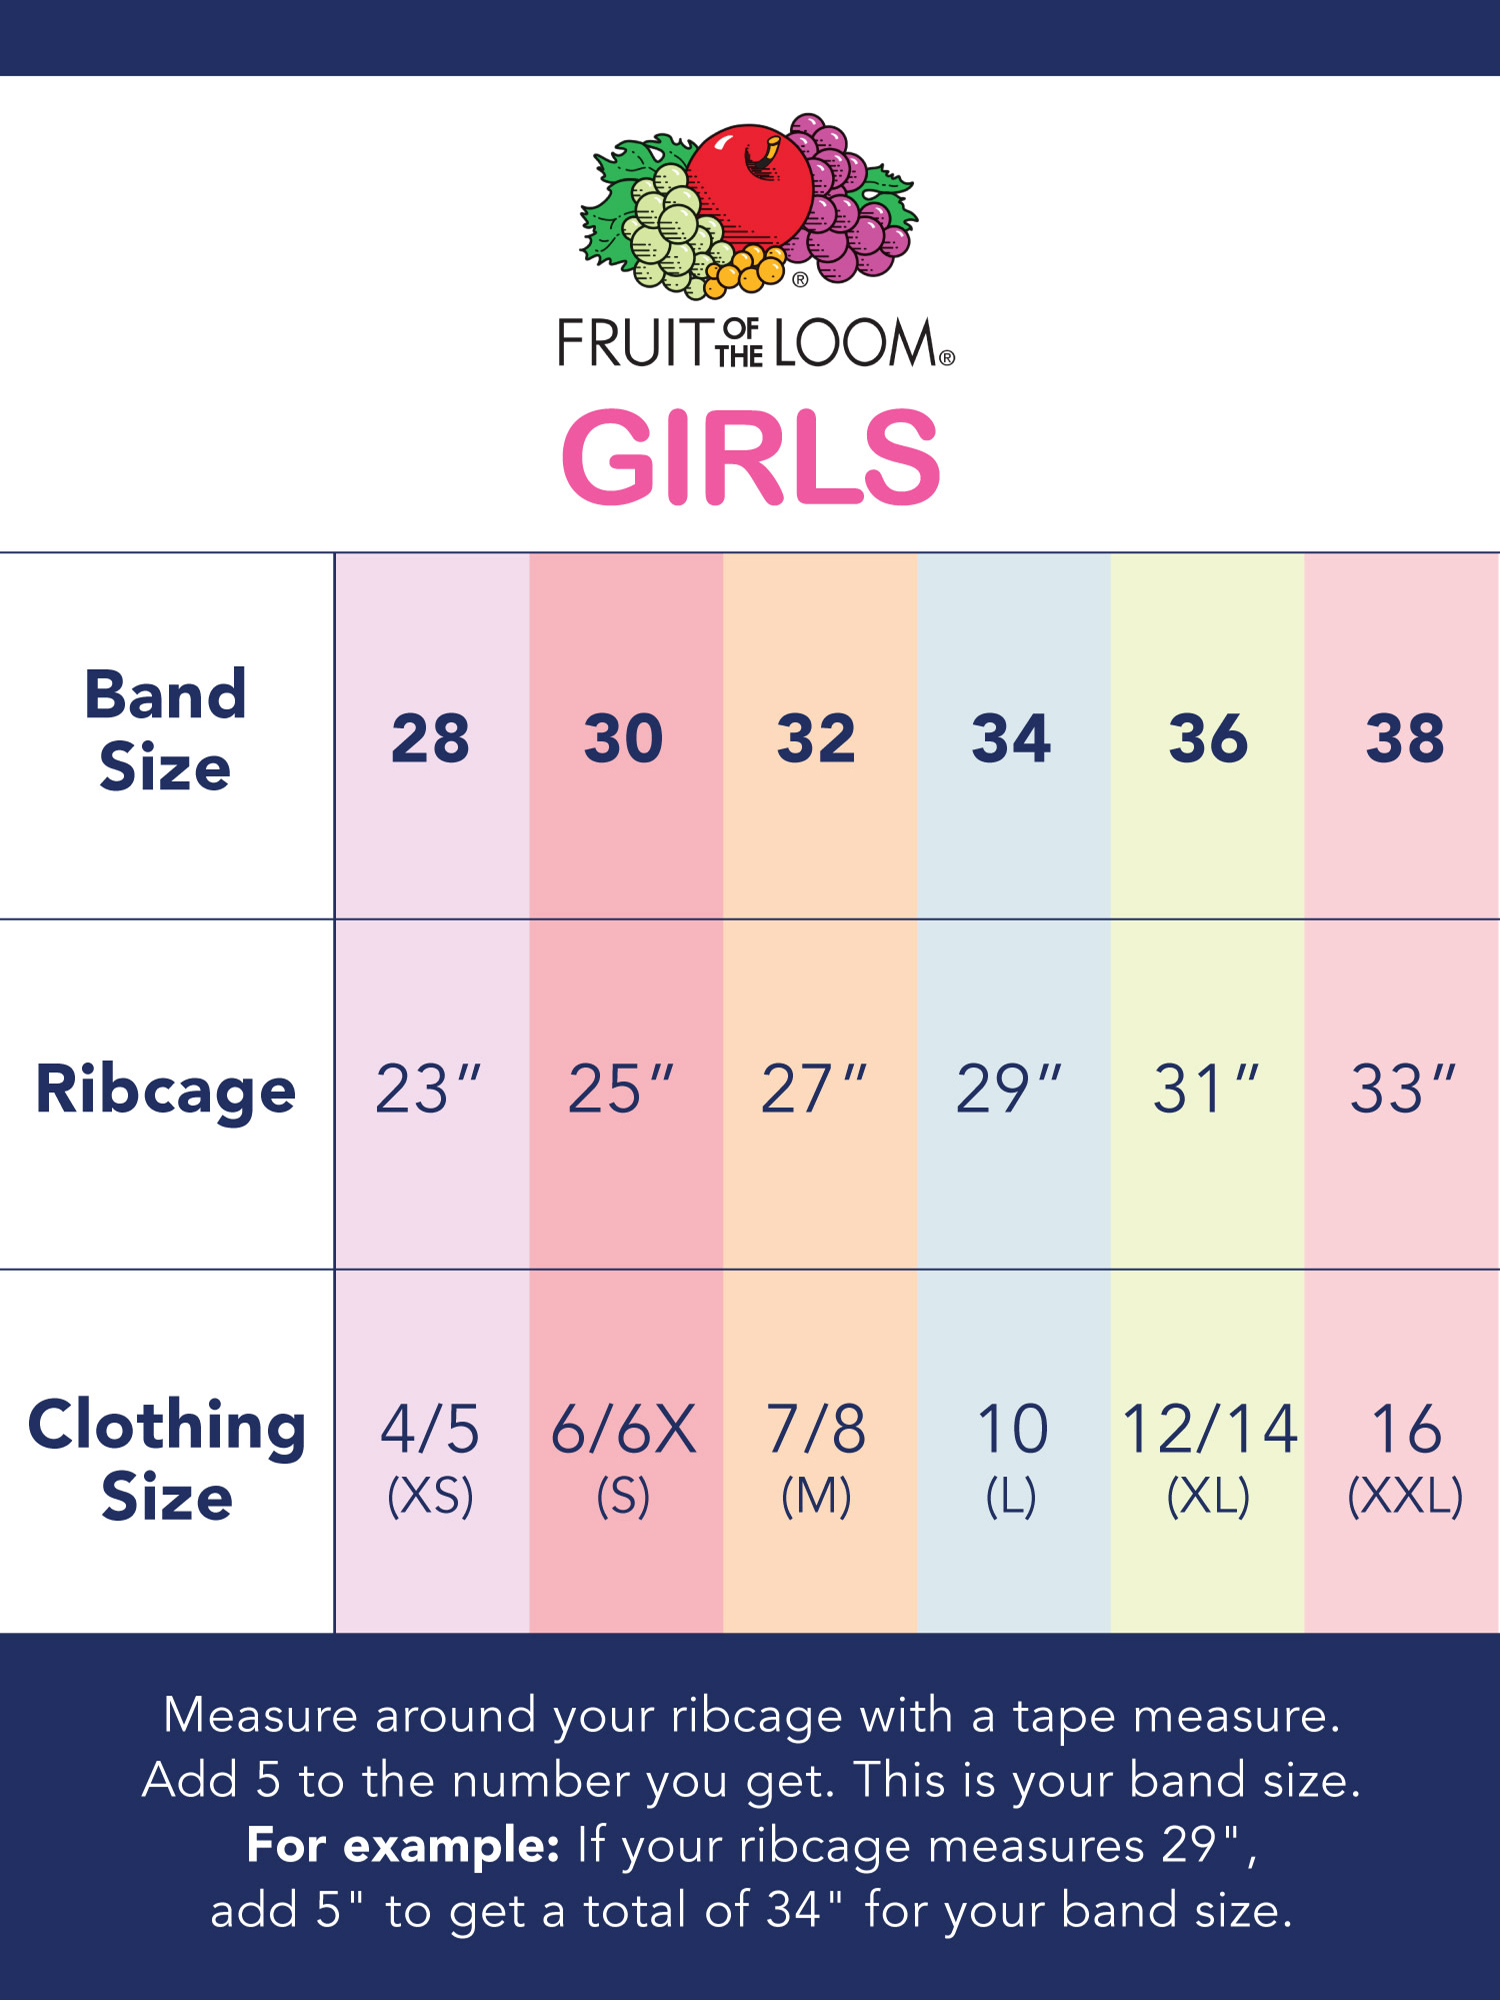 Fruit of the Loom Girls Sports Bra with Removable Pads, 2-Pack, Sizes (28-38) - image 3 of 6